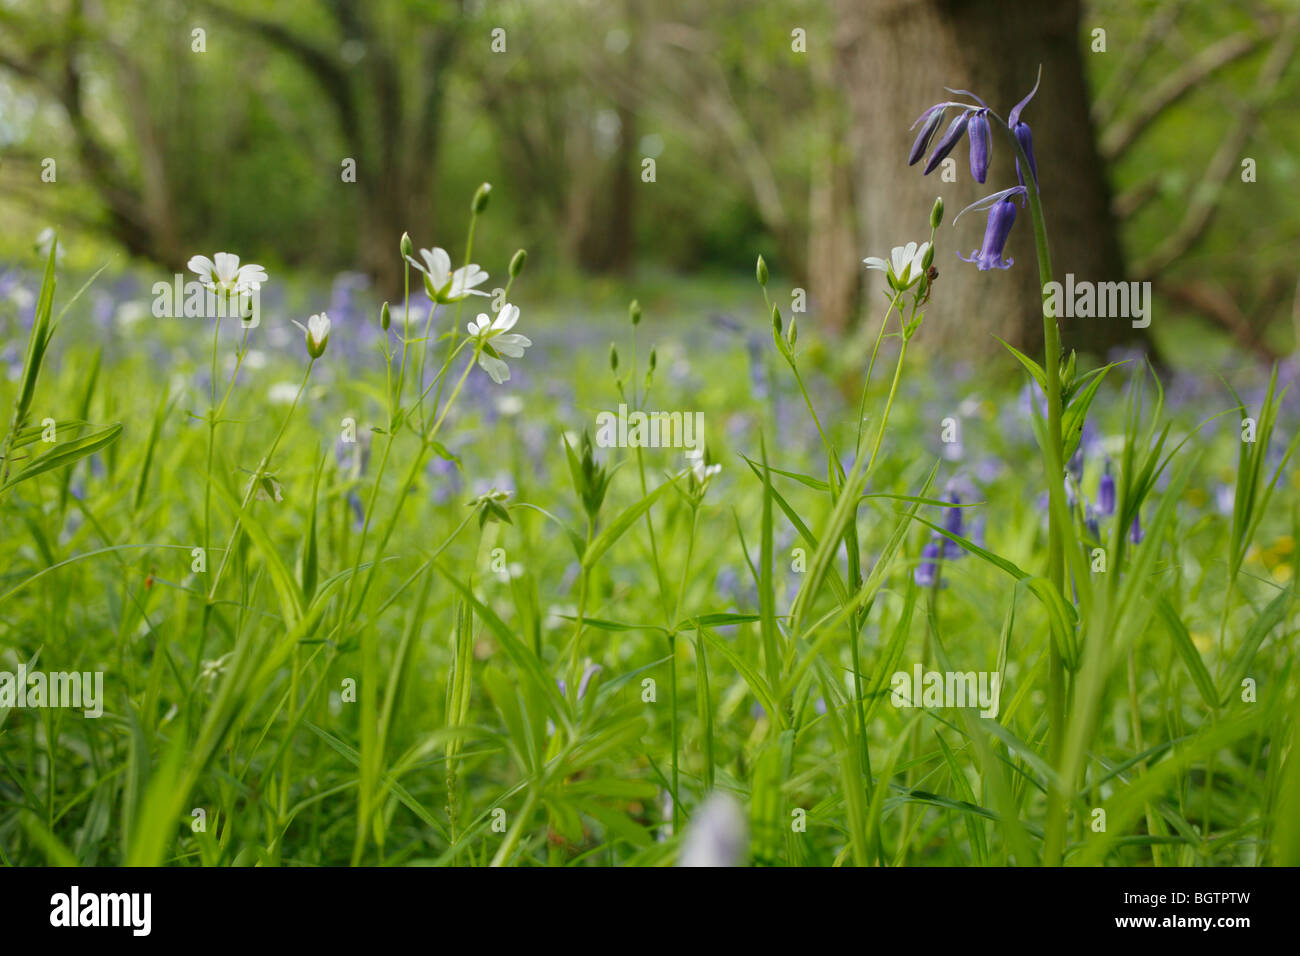 Bluebells and Greater Stitchwort flowering in woodland. Cilcenni Dingle, A Woodlands Trust property. Powys, Wales. Stock Photo